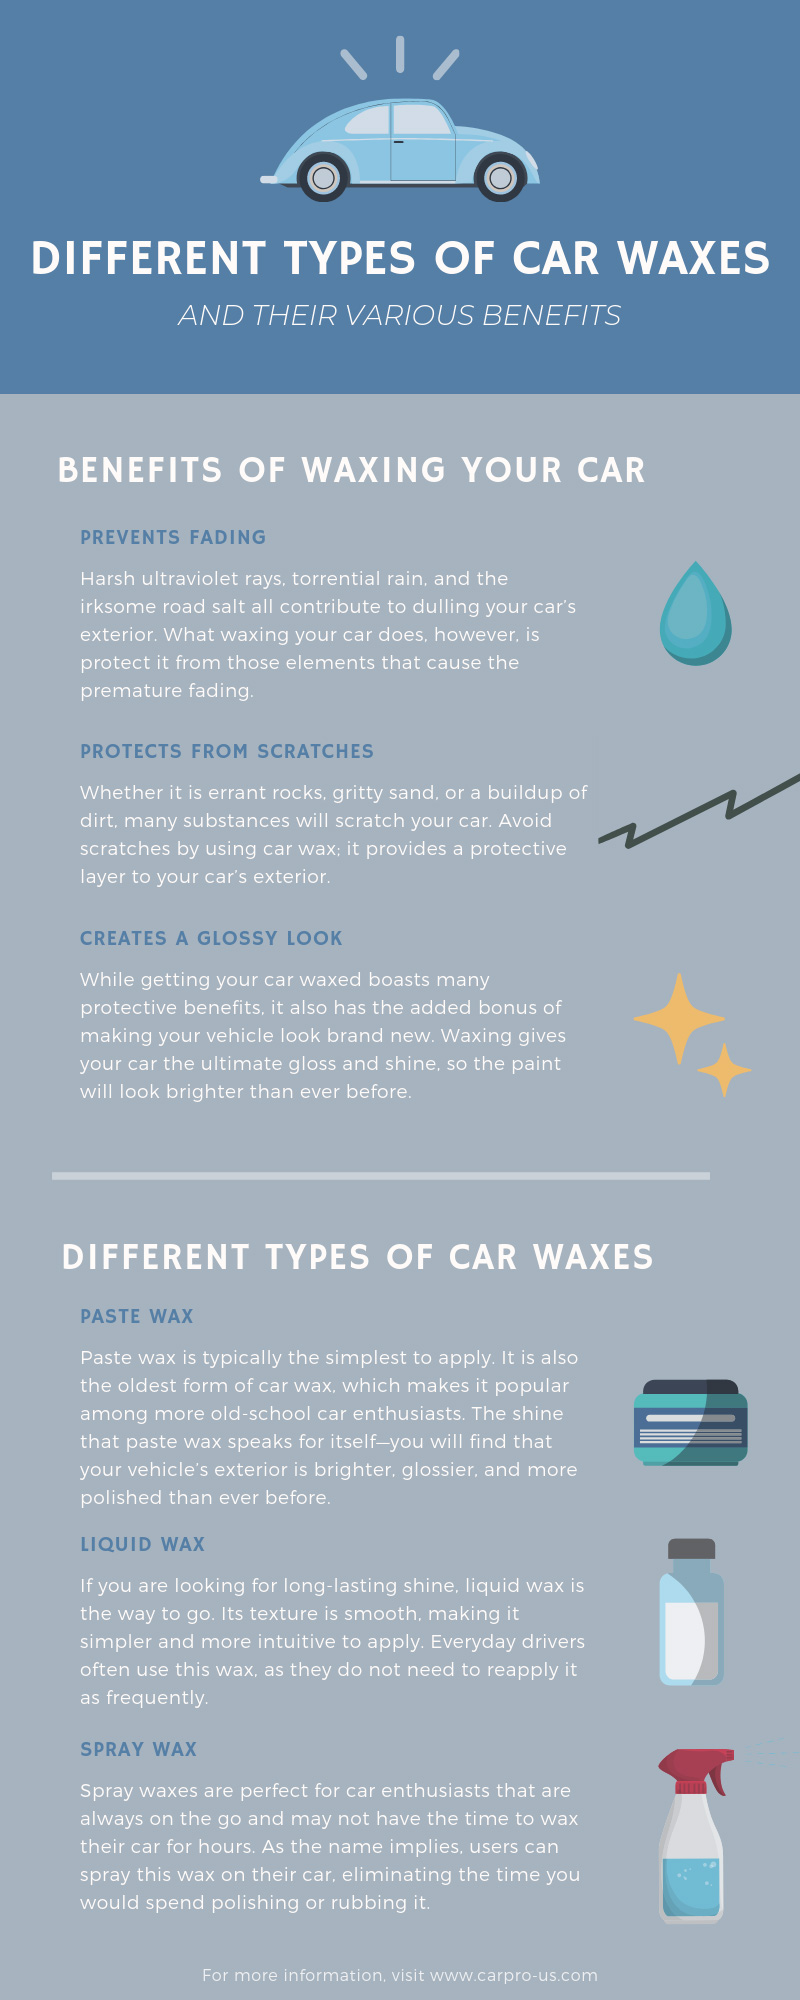 Different Types of Car Waxes and Their Various Benefits